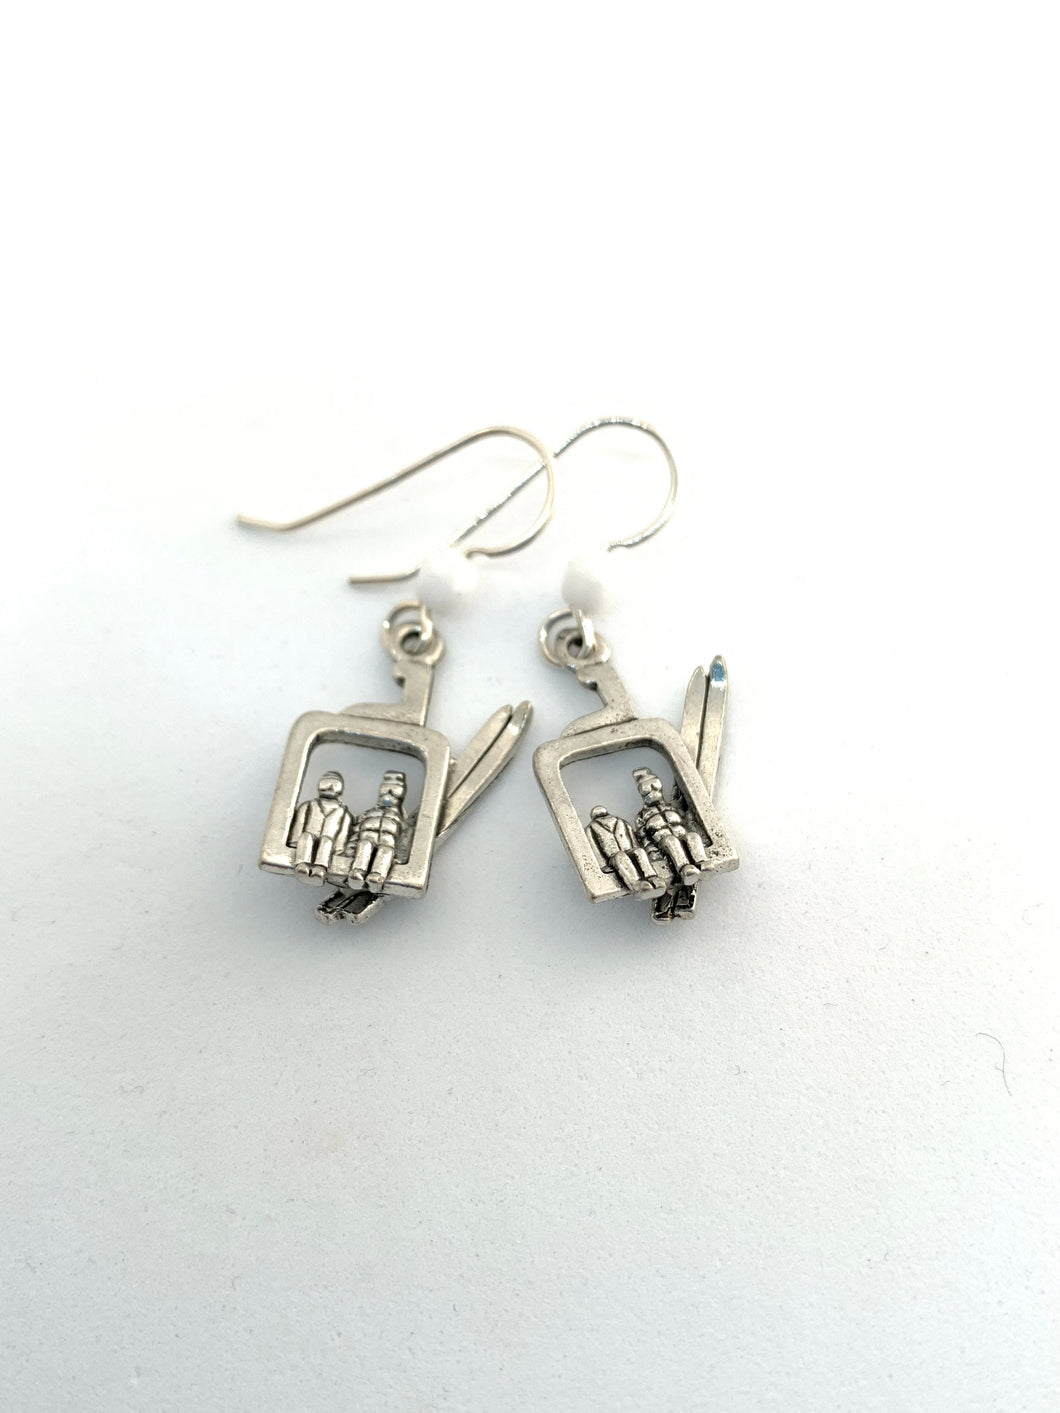 Ski Lift Earrings - Lively Accents